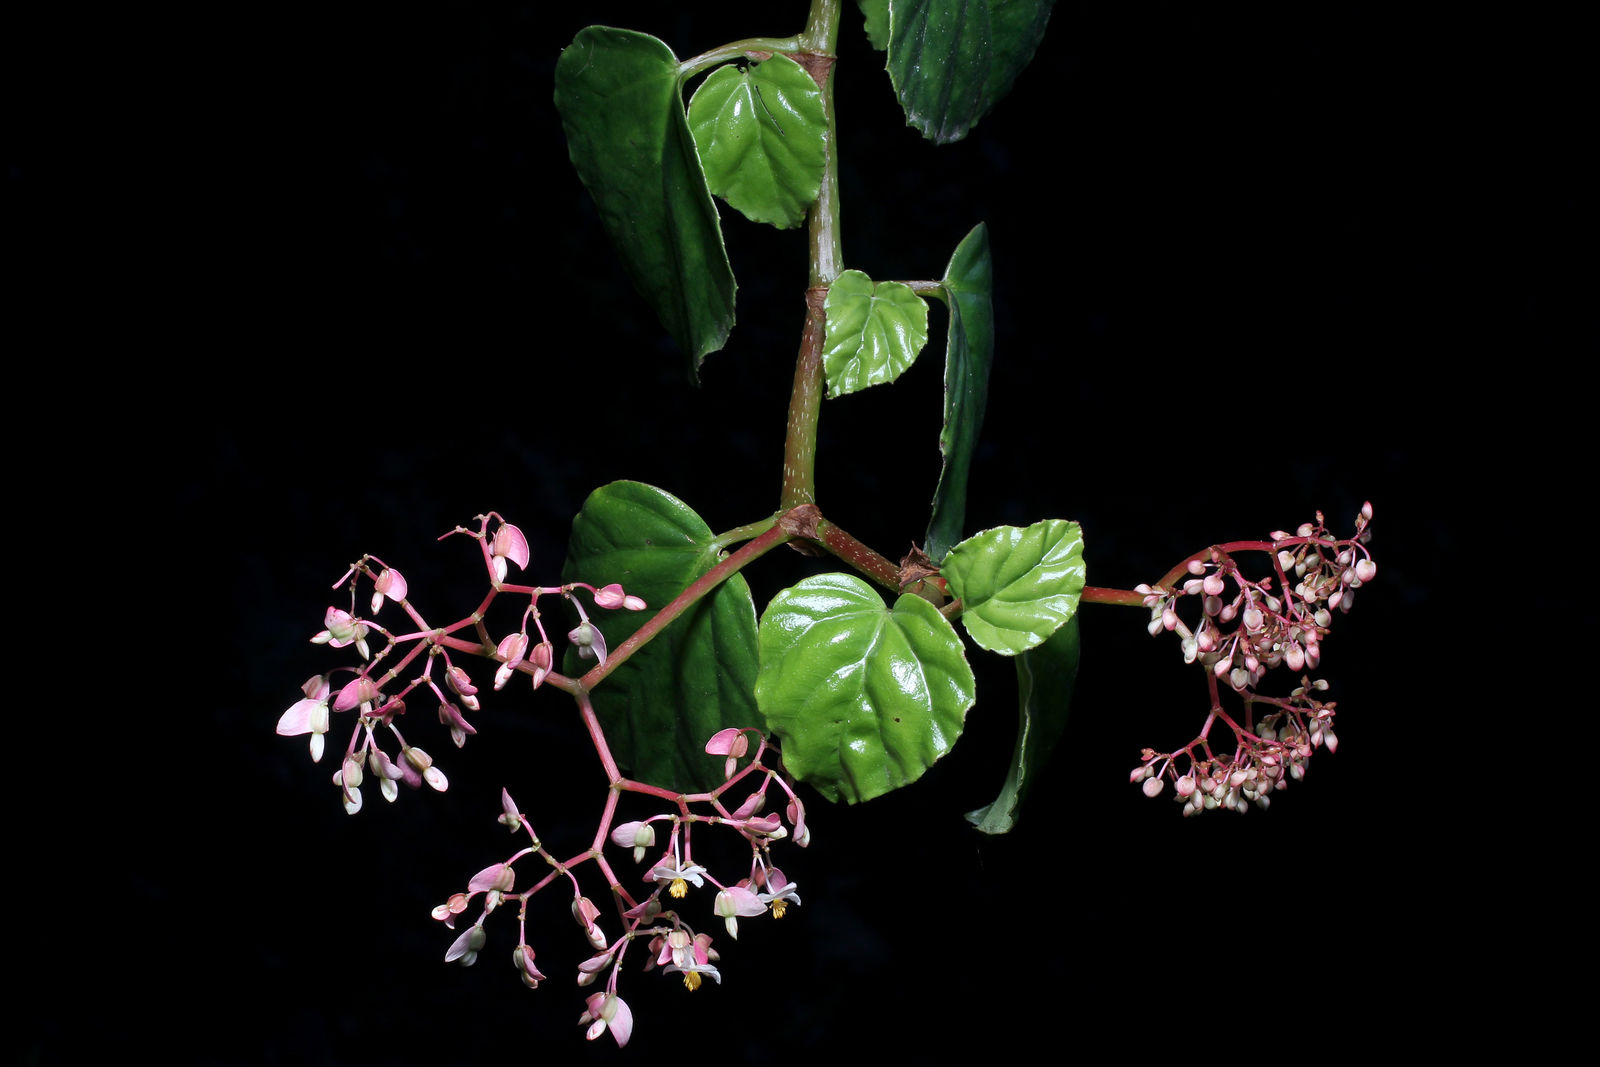 Begonia glabra Aubl. | Colombian Plants made accessible